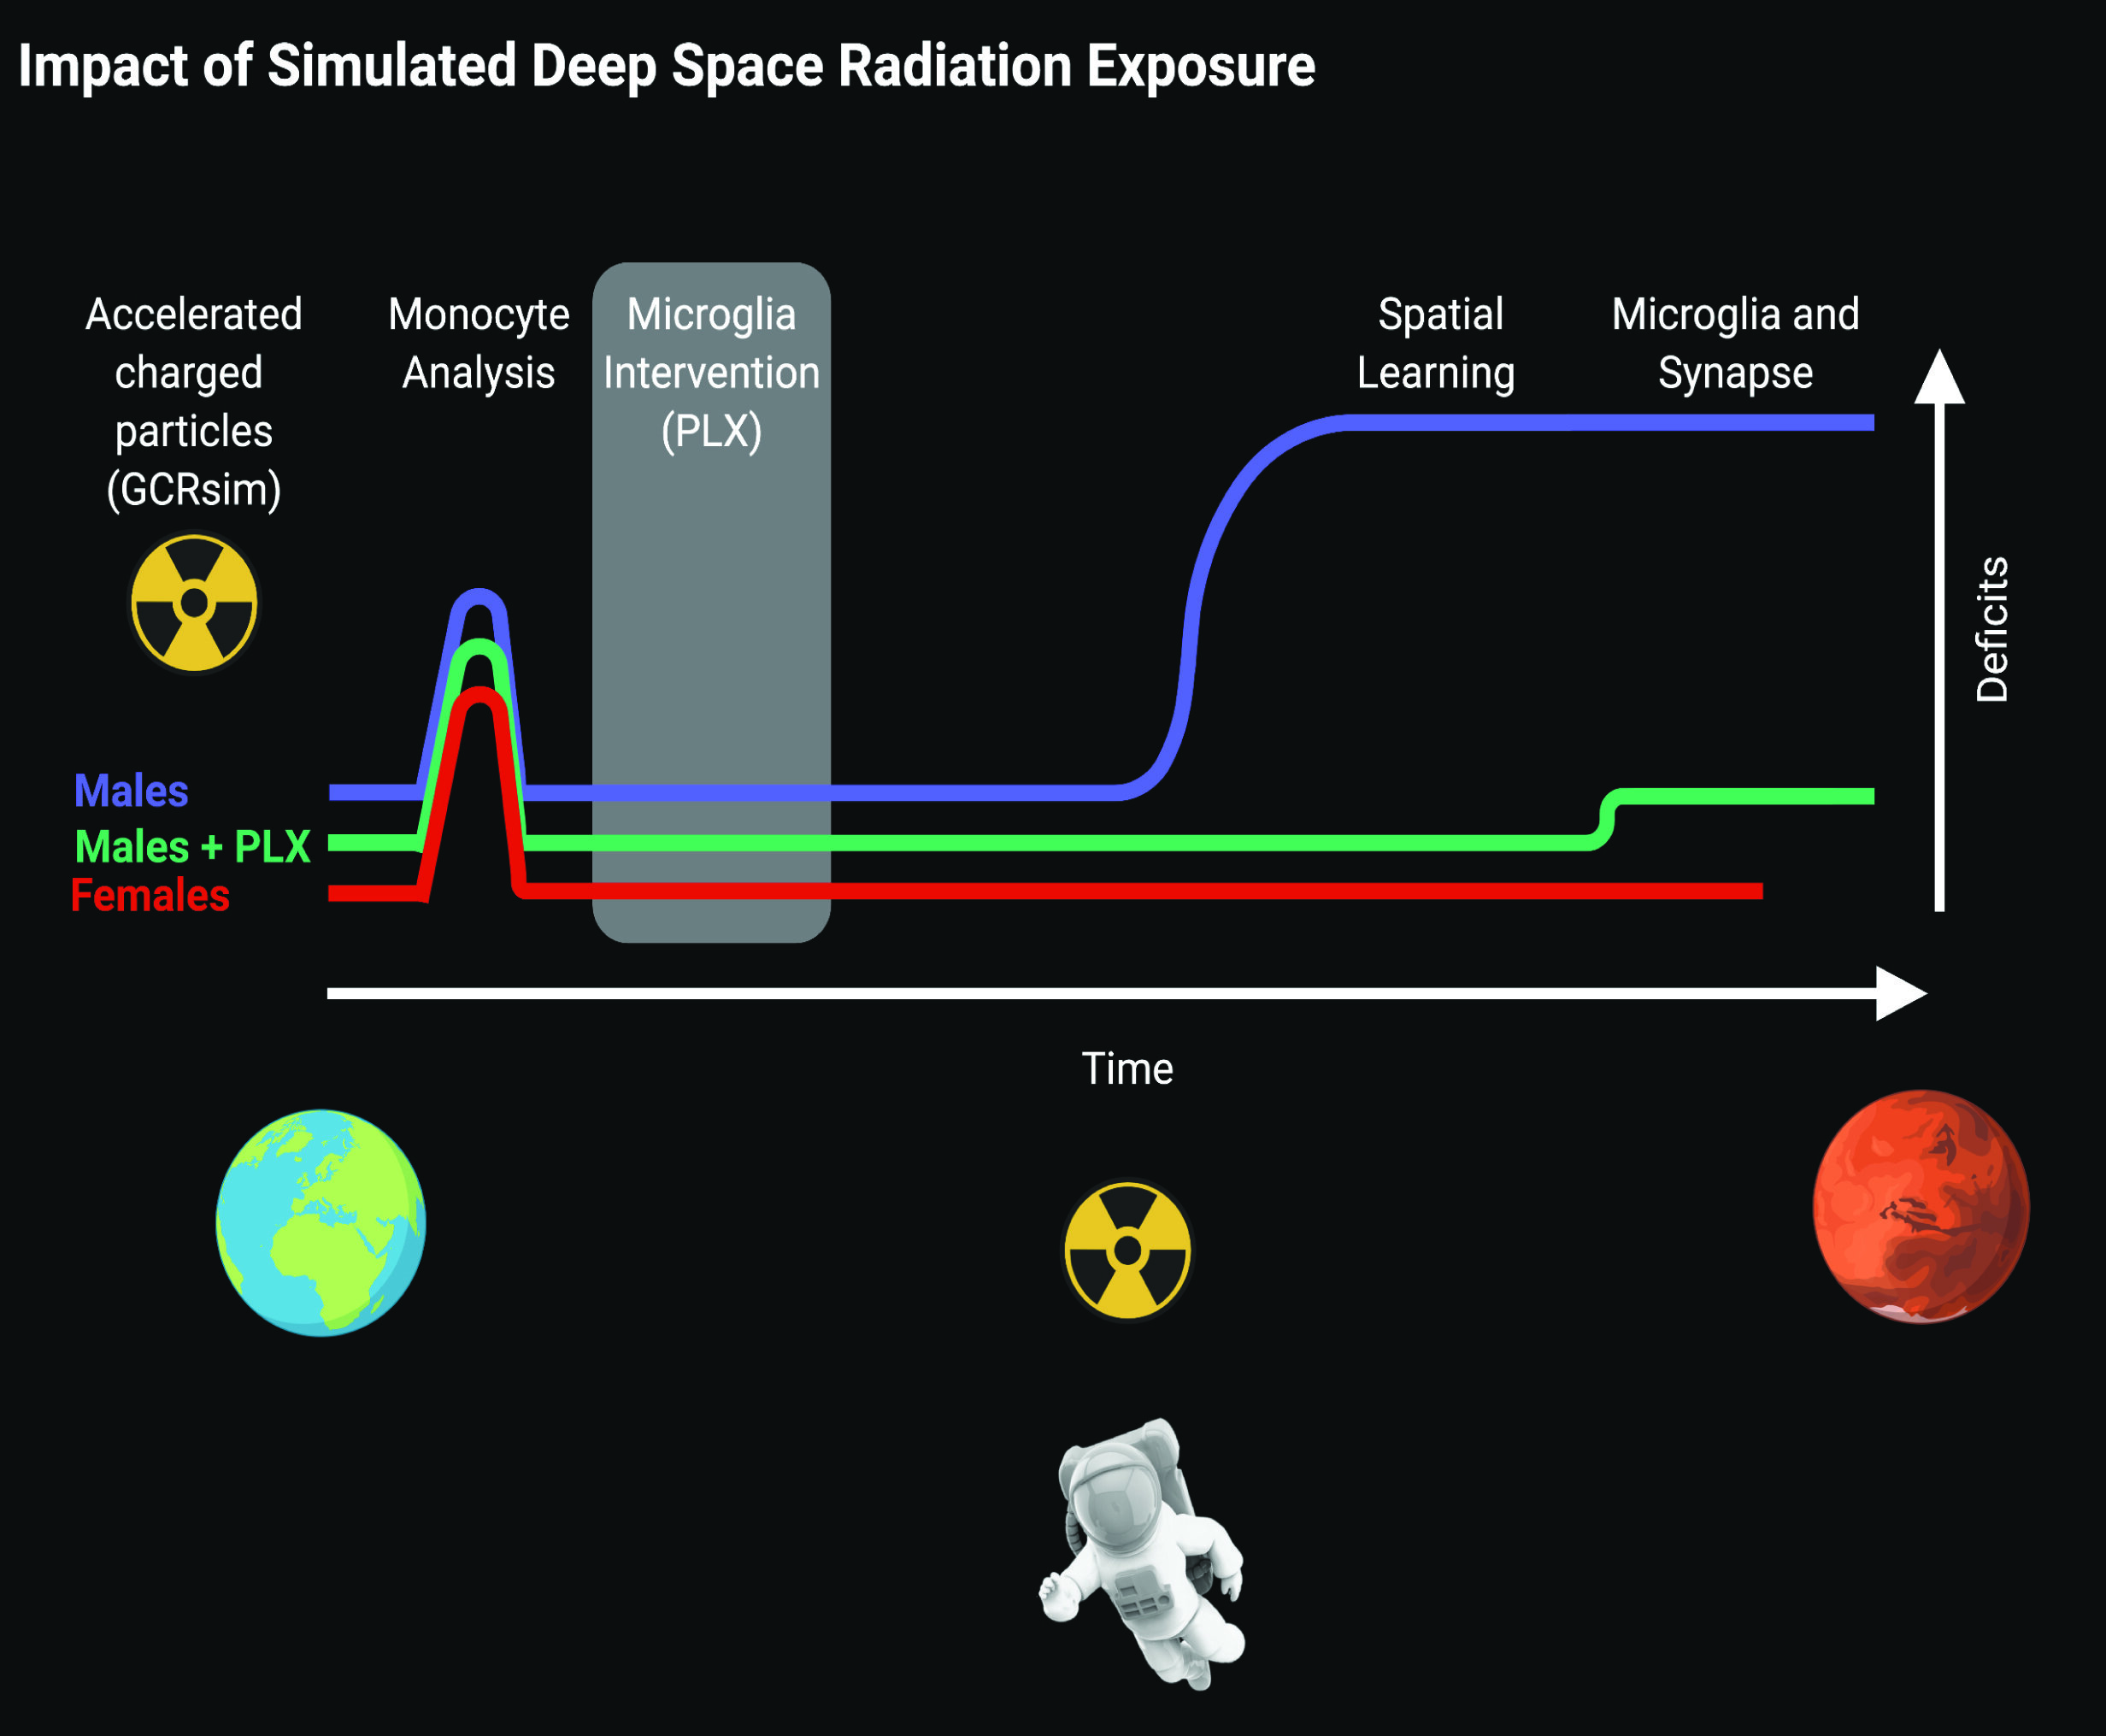 Male mice exposed to simulated deep space radiation experienced impaired spatial..